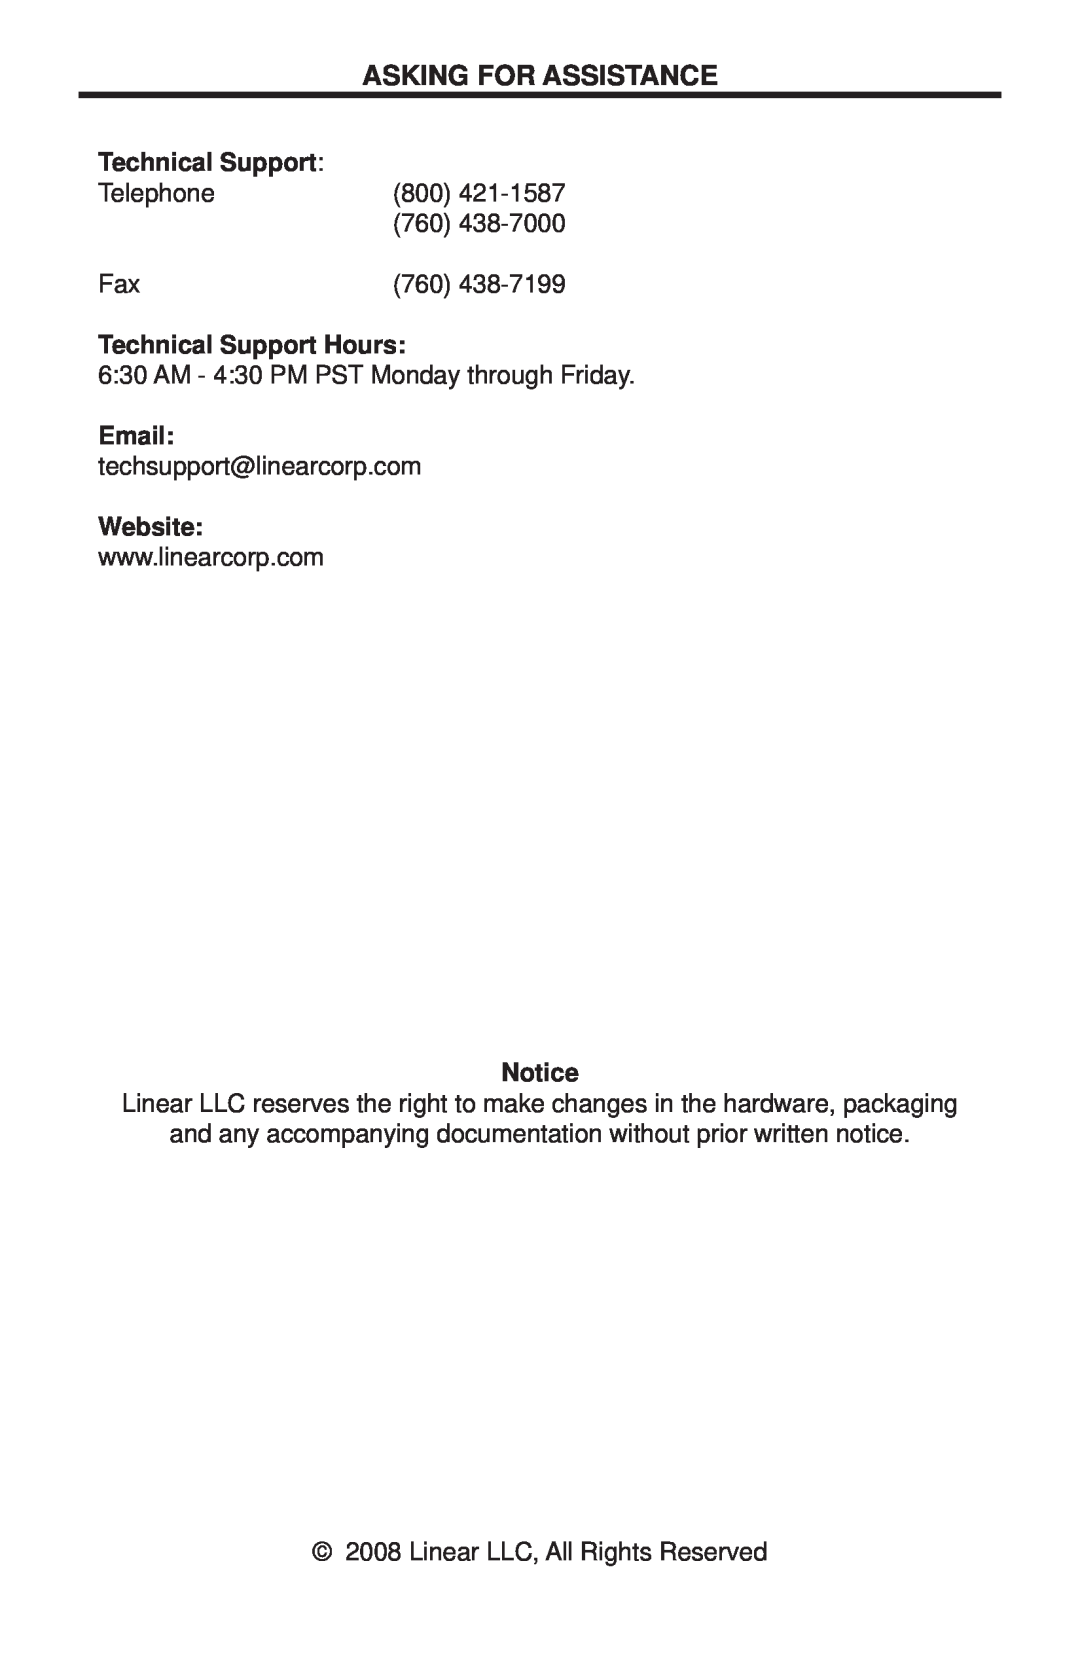 Linear COMP-DA-1X3 user manual Asking For Assistance, Technical Support Hours, Website 